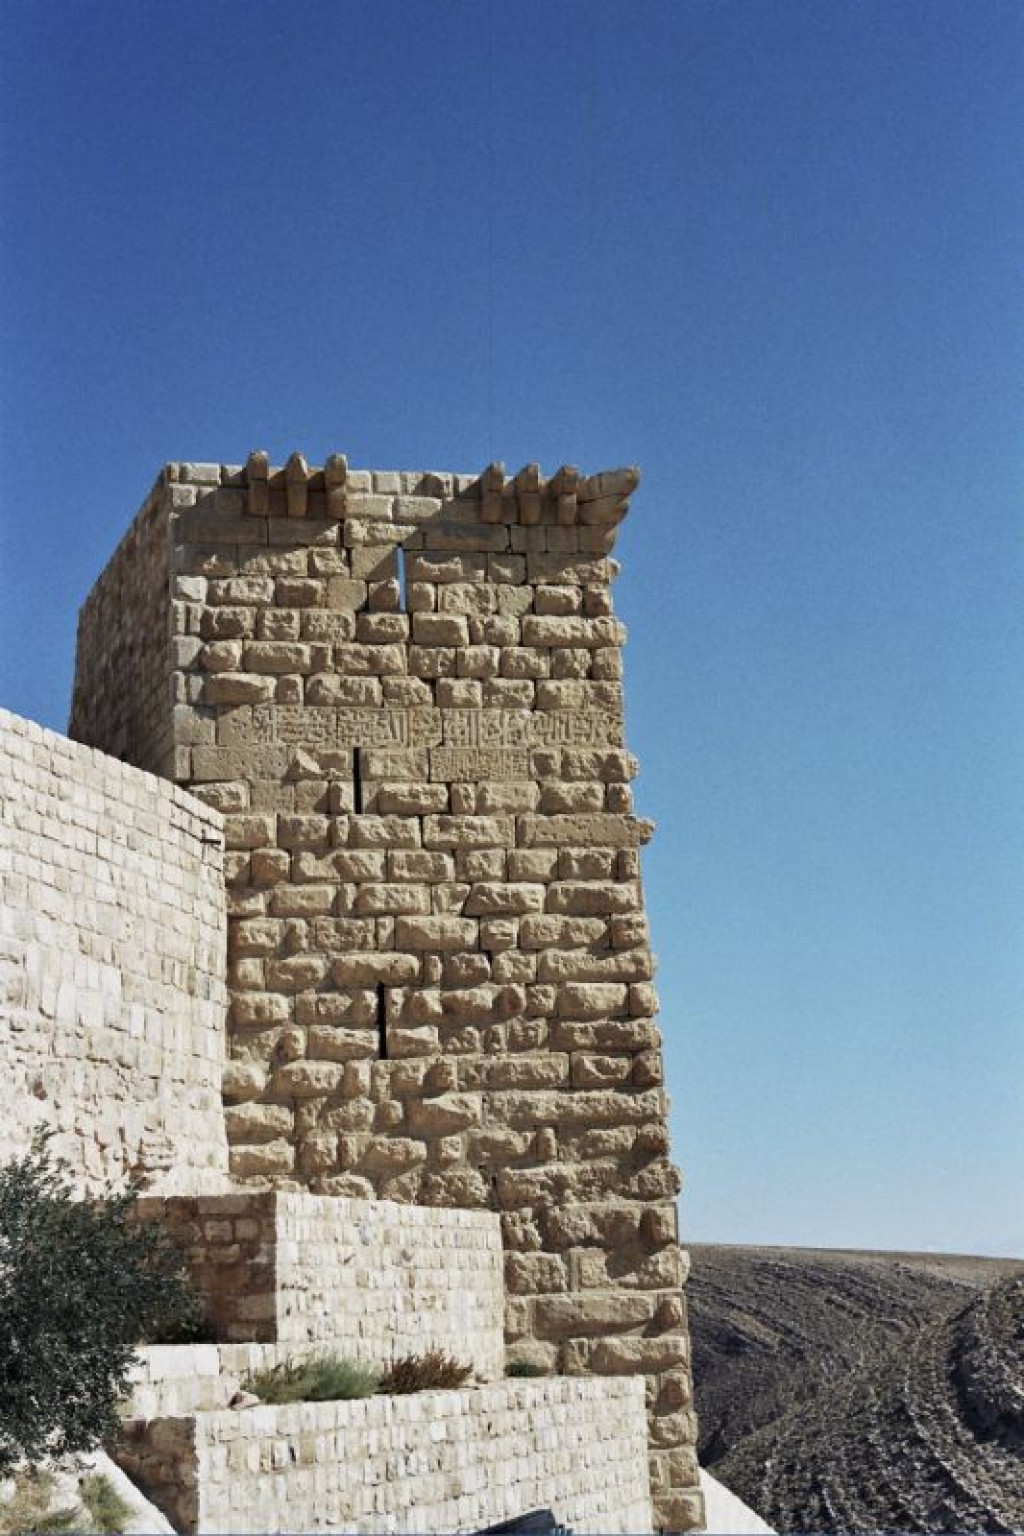 At Shobak Castle, on the Kings Highway, we really had to use our imagination to know what the castle used to look like.  There was some interesting rock formations nearby, though.